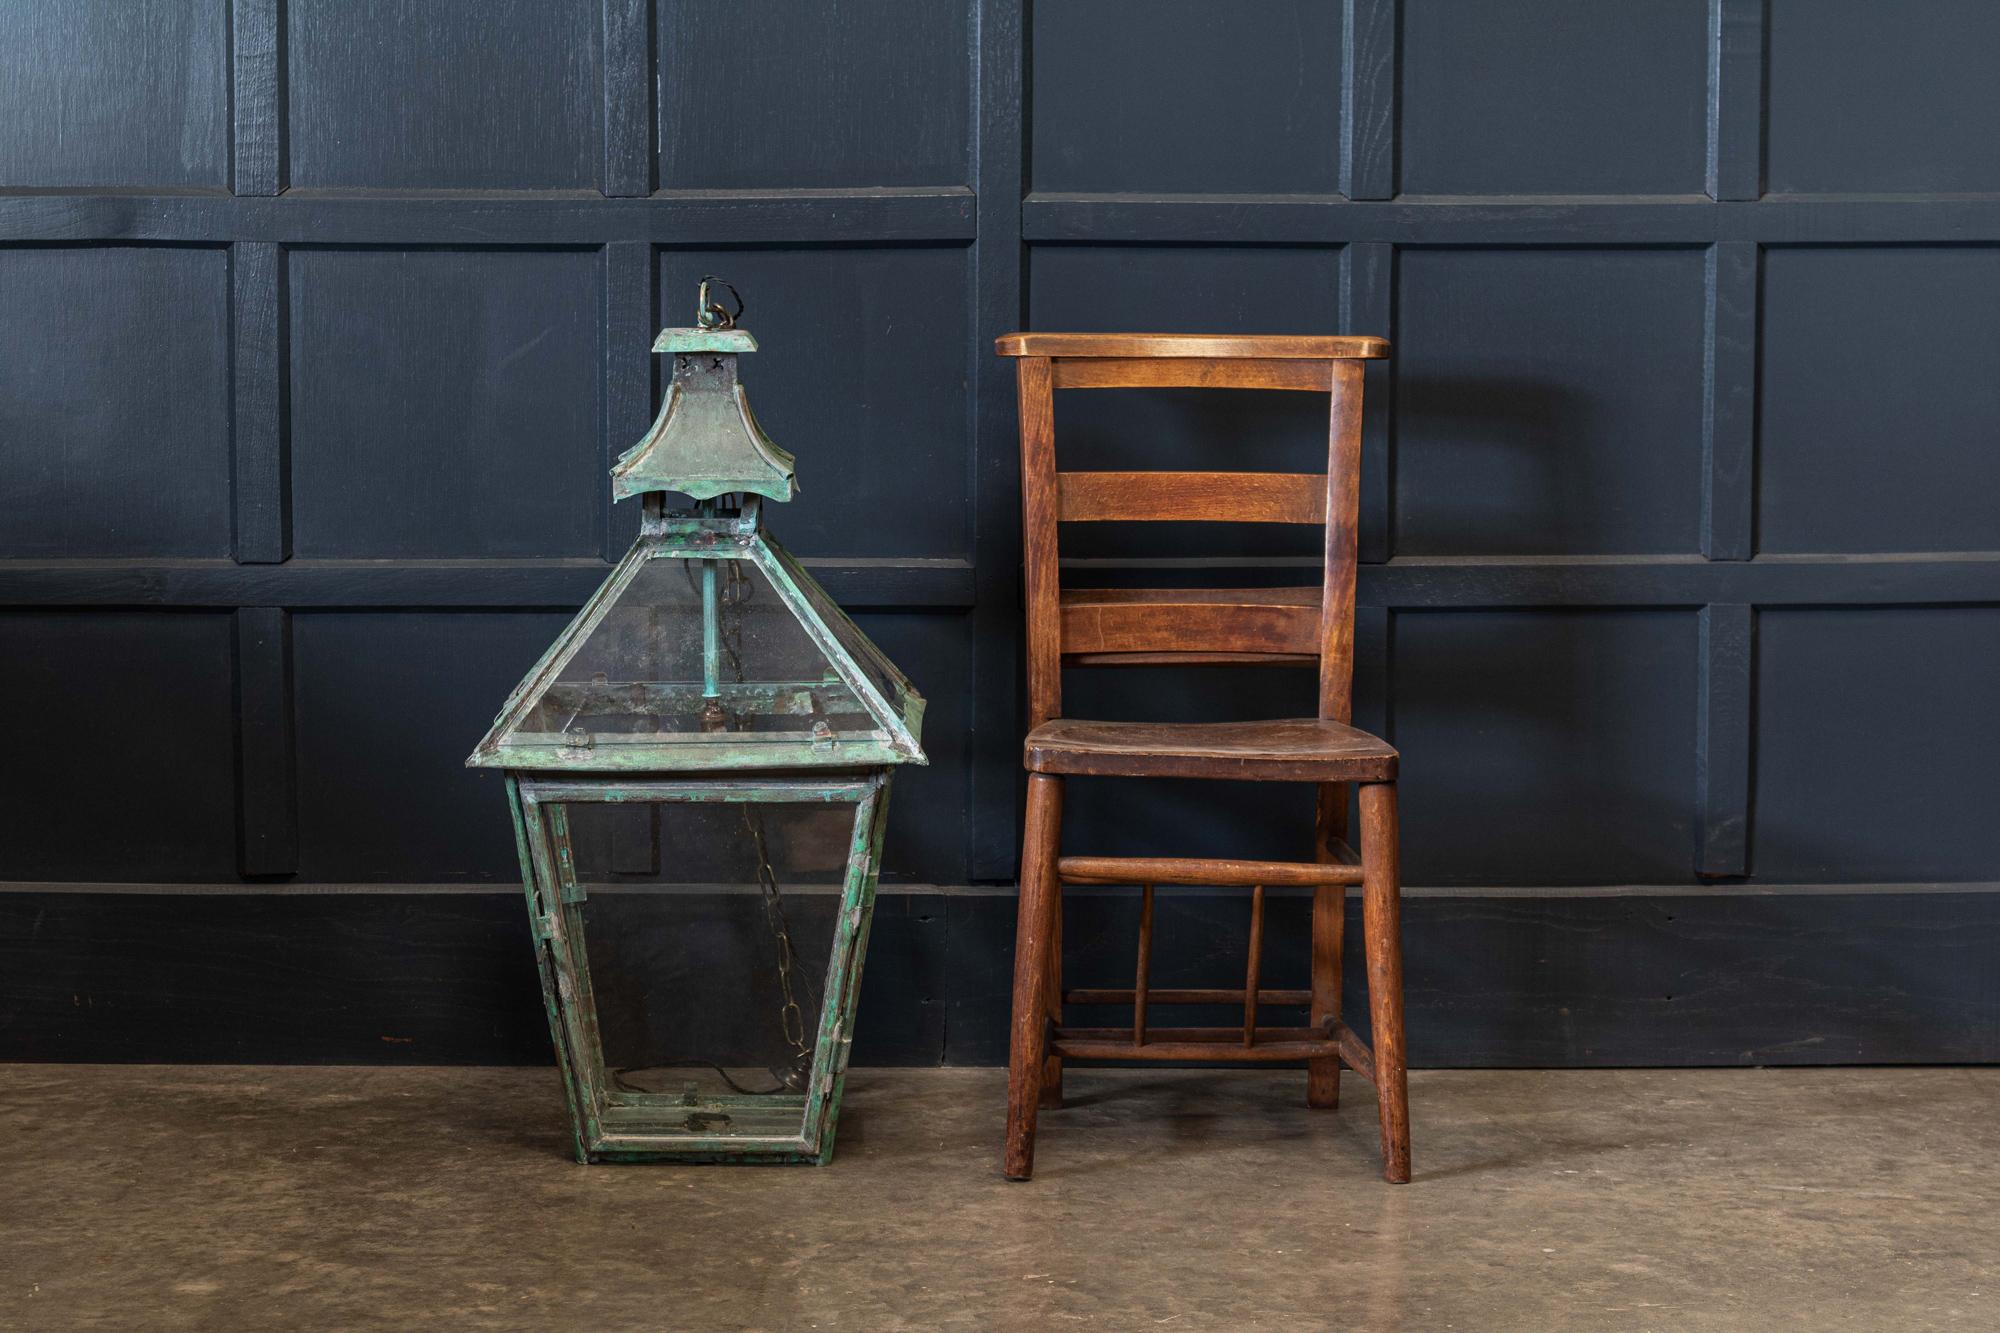 Circa 1880.

Large French verdigris copper lantern
With pergoda top and hinged front door. Comes with 1m of silk flex, 1m of heavy gauge antique brass chain & bronze ceiling hook.
Re-glazed rewired & pat tested - ready to hang.

  